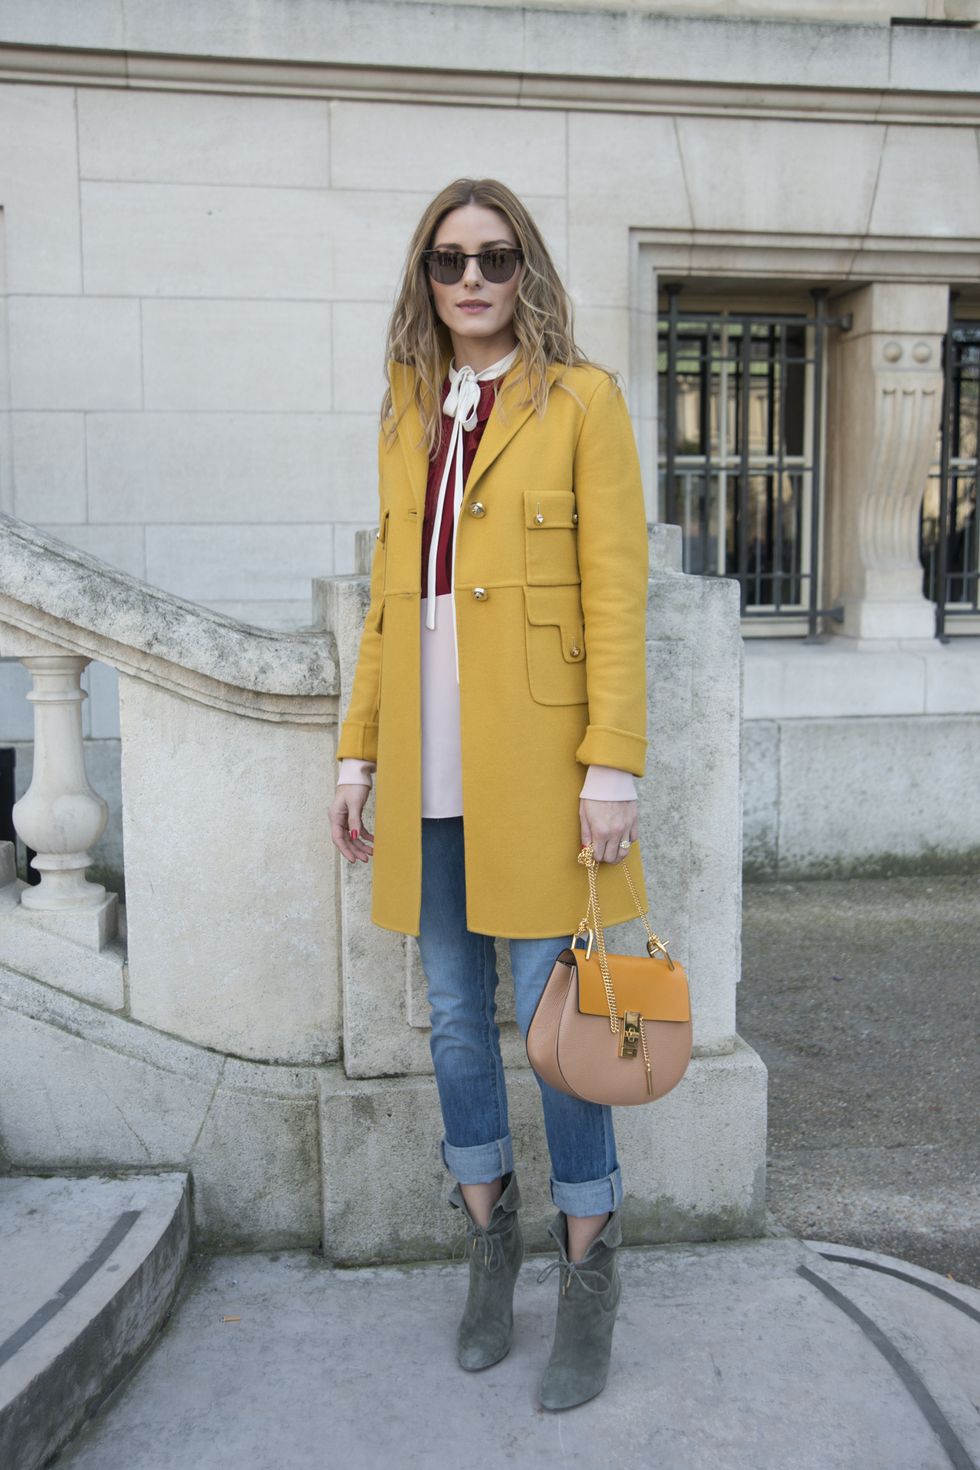 PARIS, FRANCE - MARCH 08: Actress Olivia Palermo wears a Chloe shirt jacket and bag at the Chloe show on day 6 of Paris Collections: Women on March 08, 2015 in Paris, France.  (Photo by Kirstin Sinclair/Getty Images)